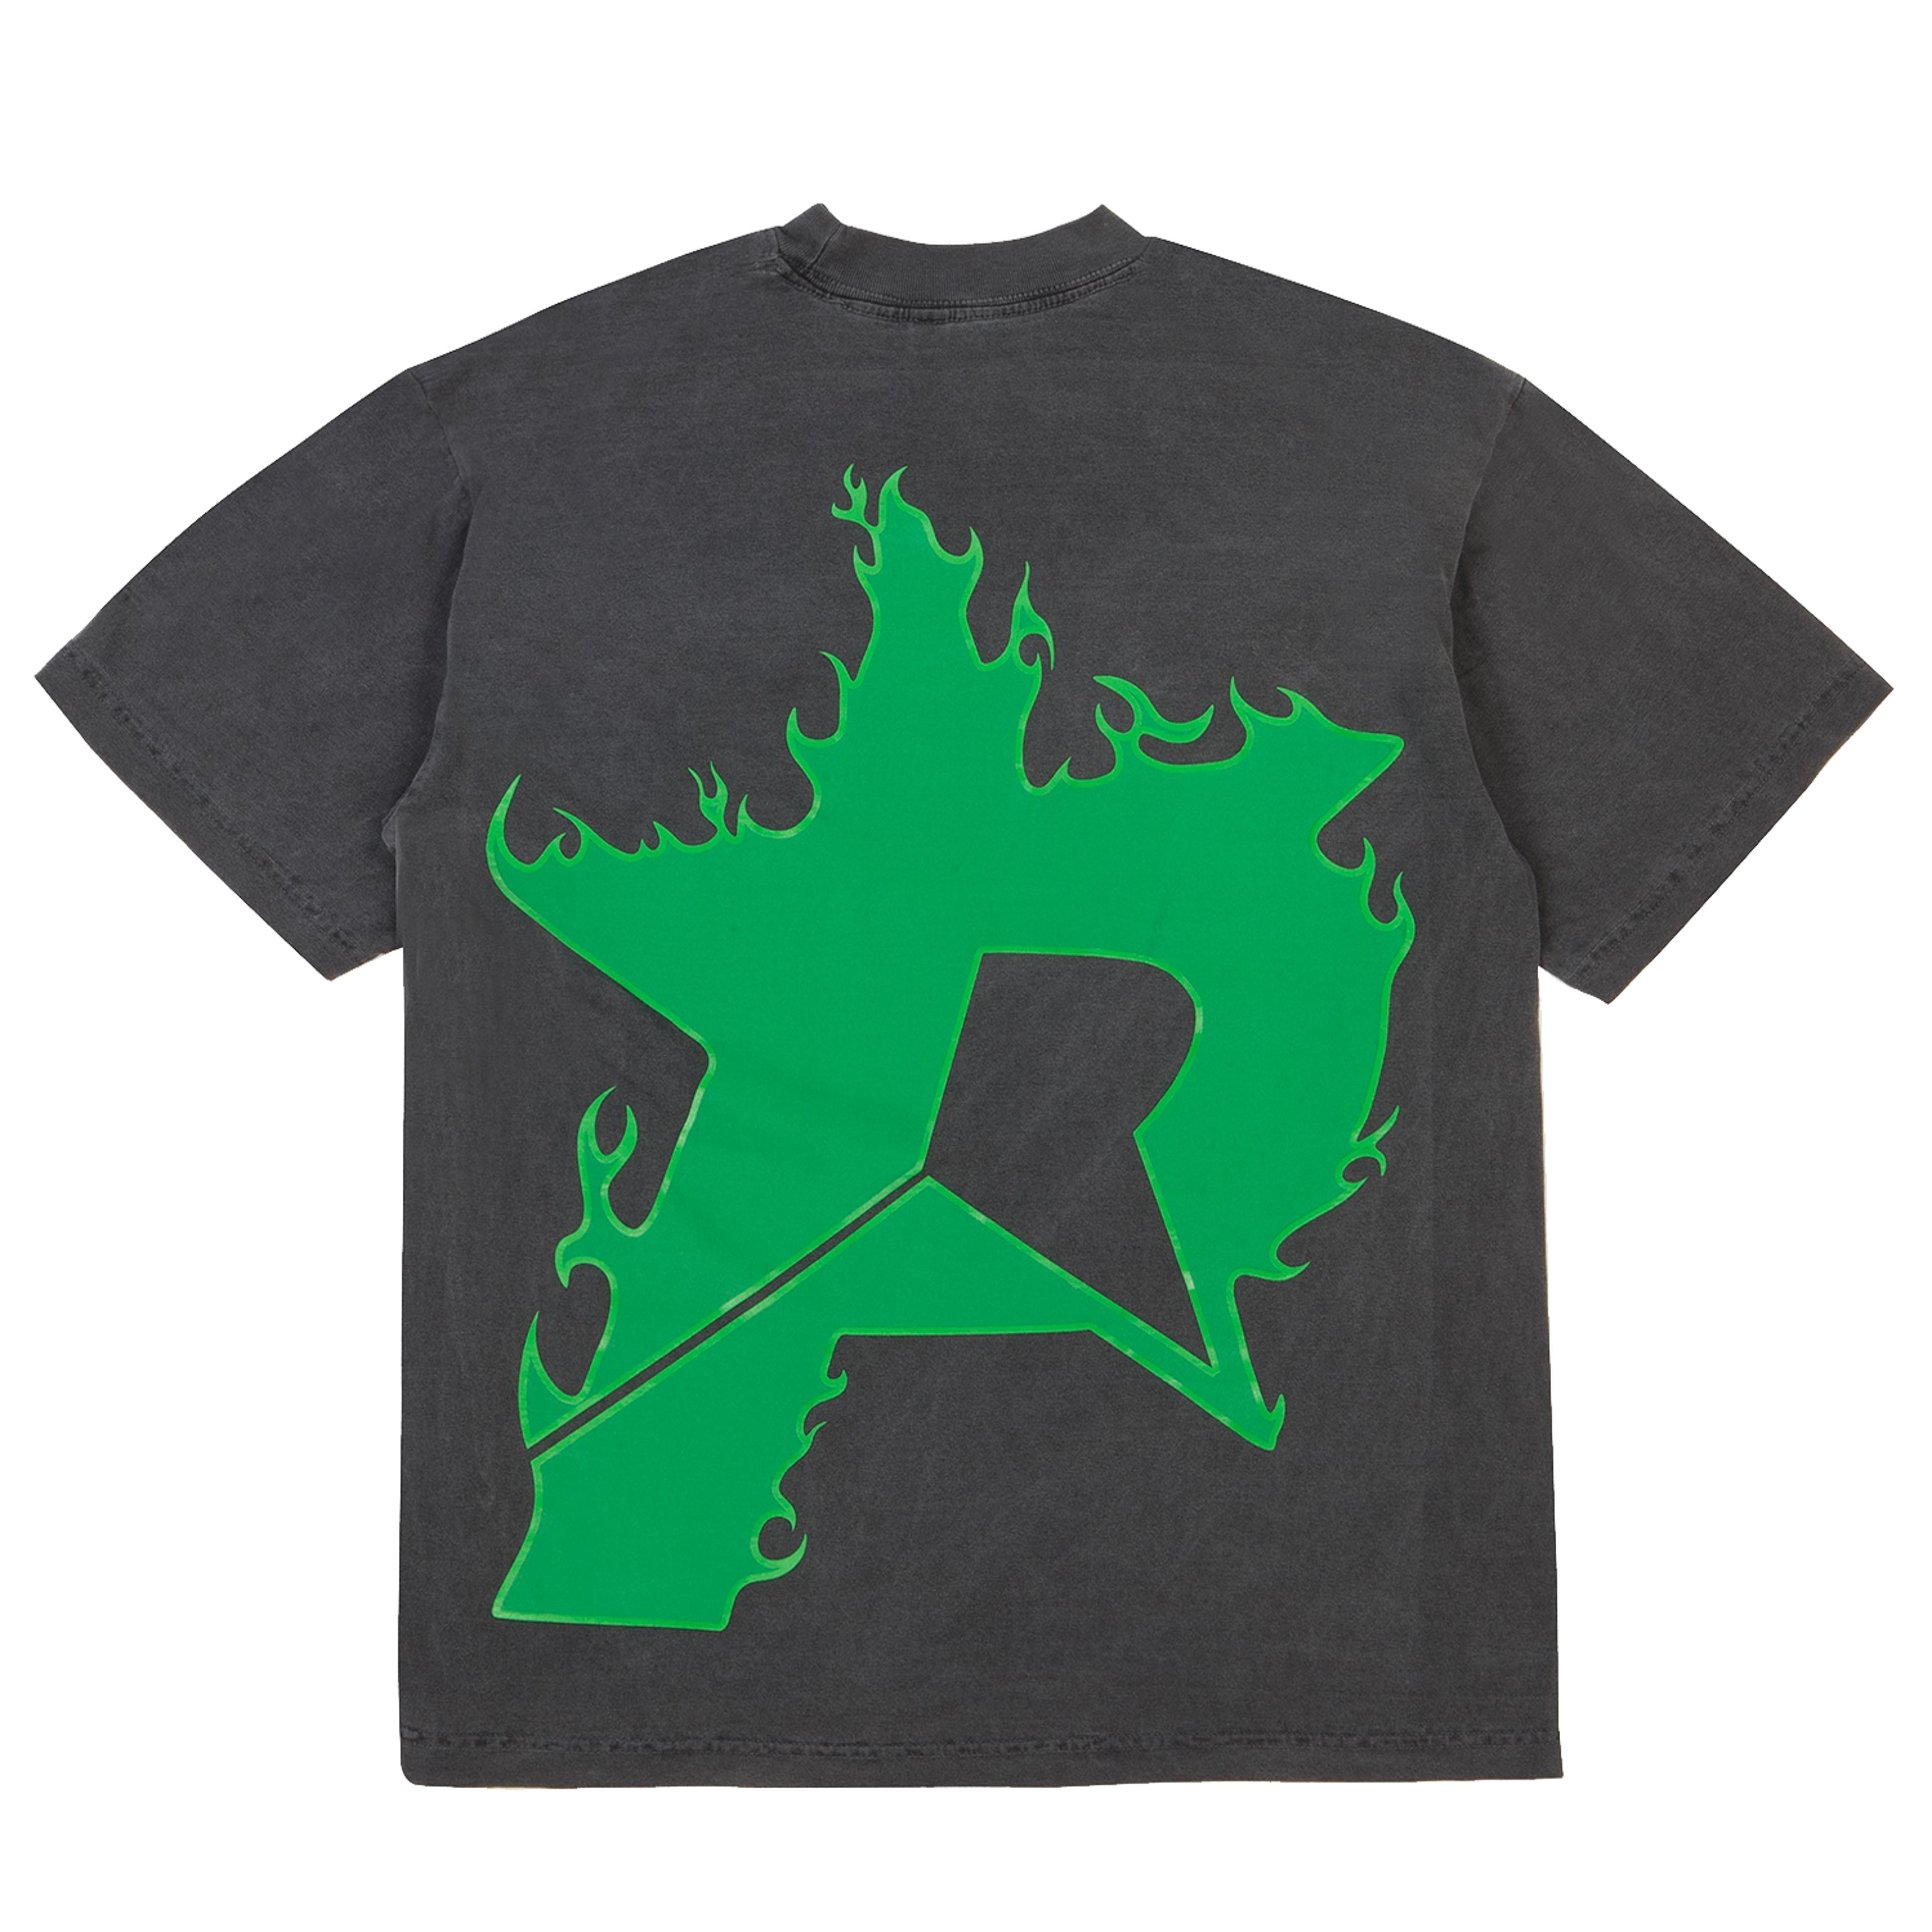 Pieces P Star Flames Tee Washed Black Green